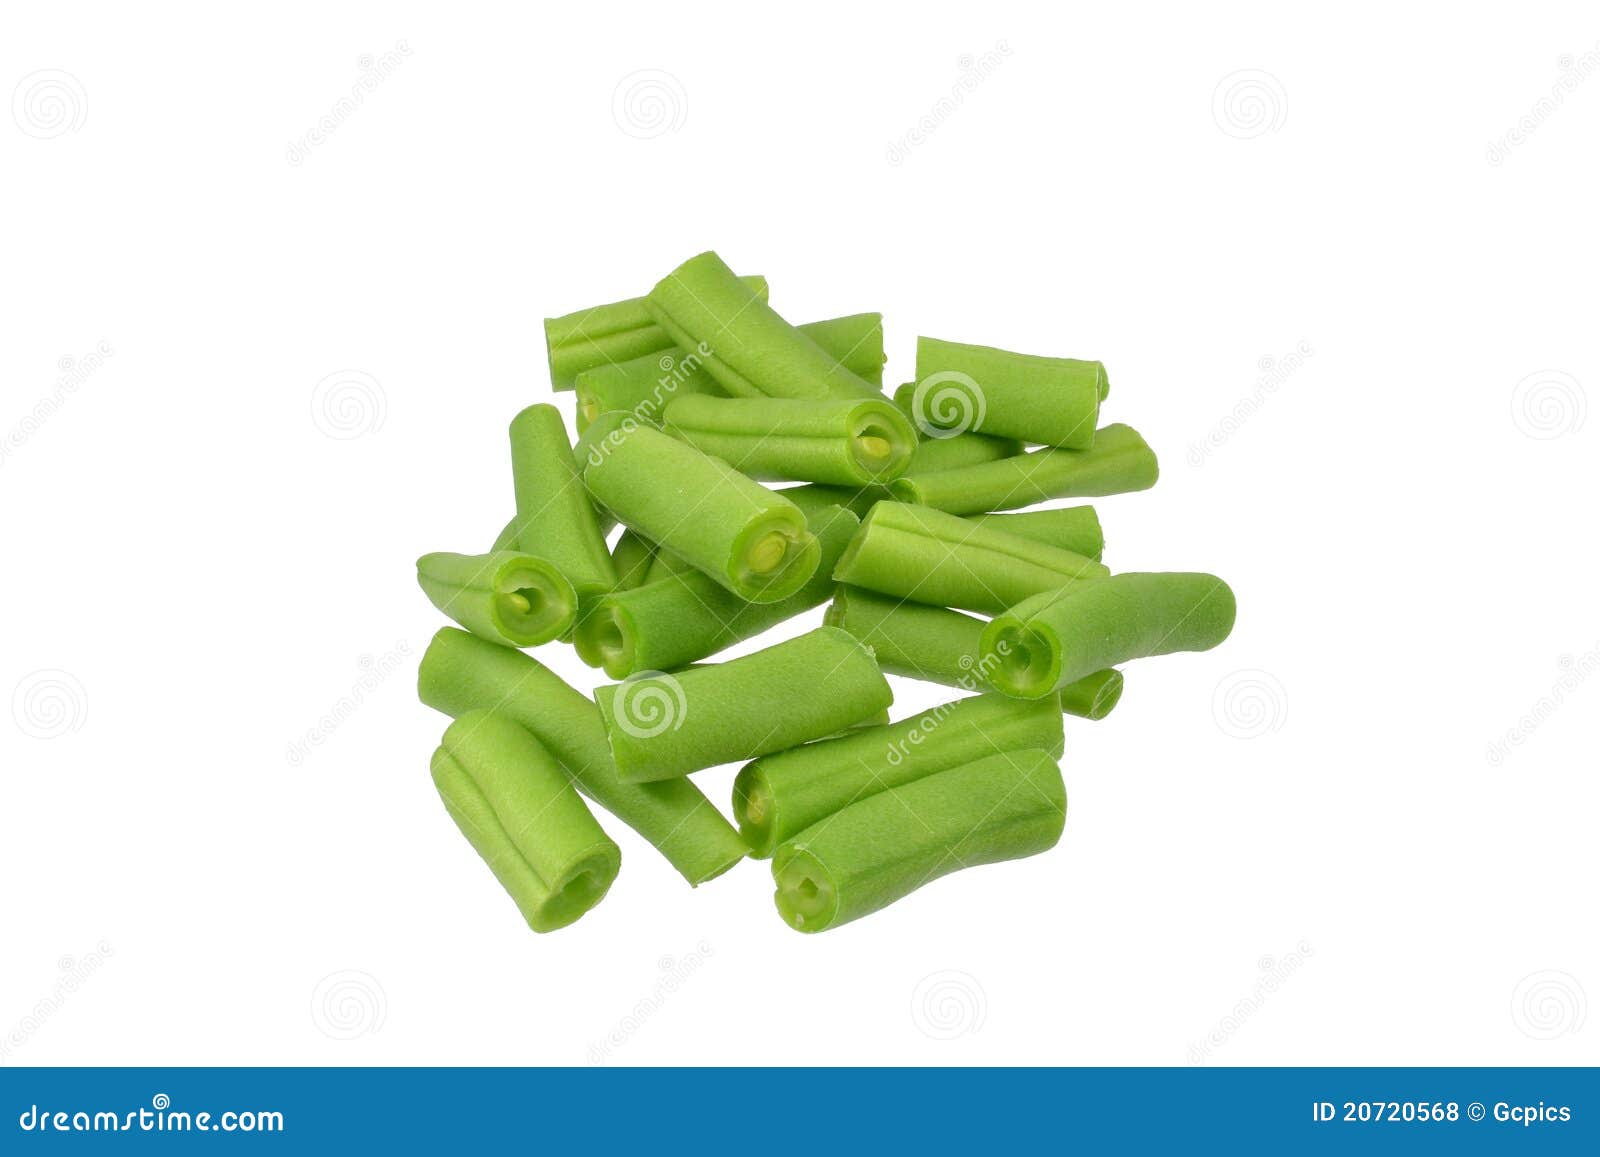 free clipart green beans - photo #29